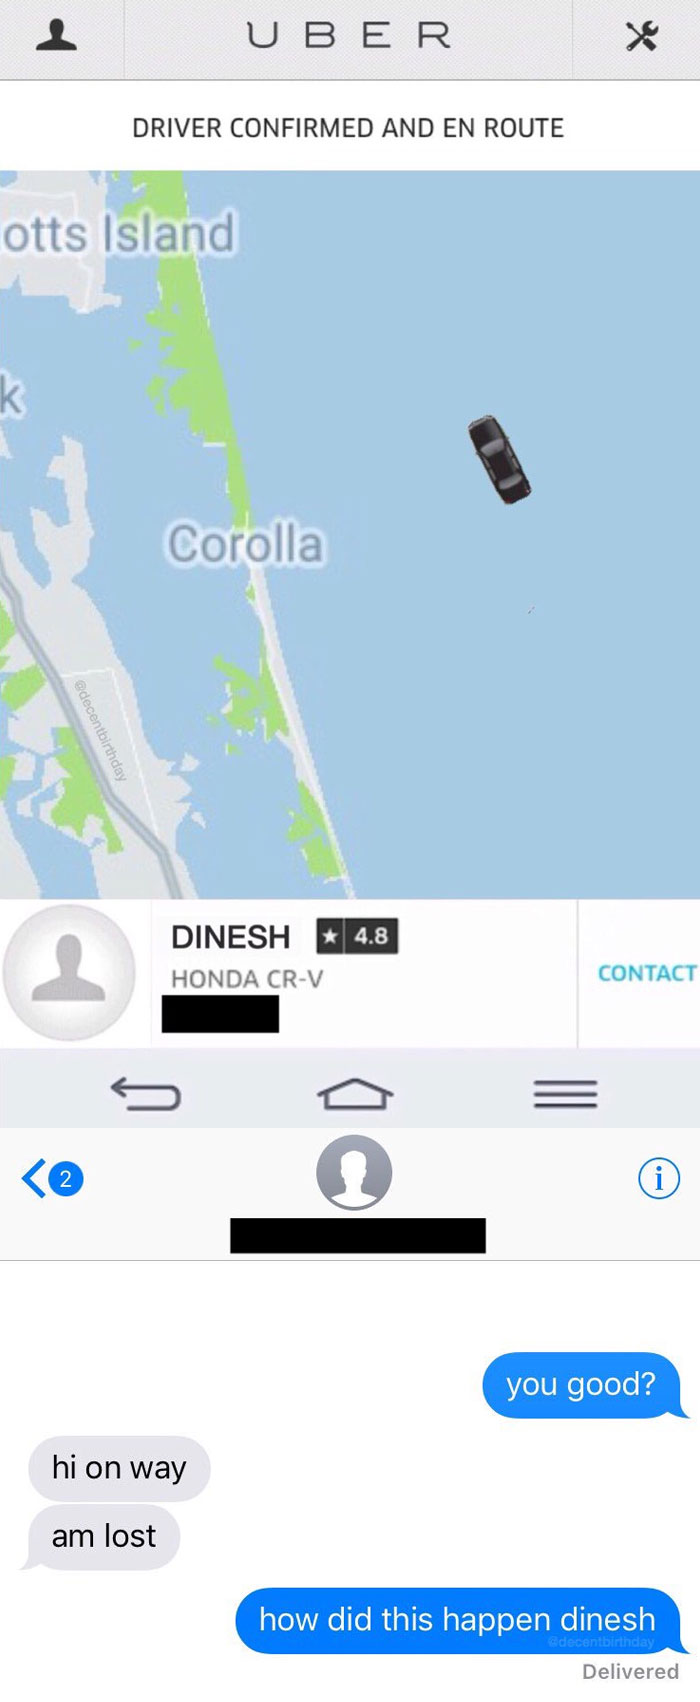 Uber Driver Confirmed And En Route otts Island Corolla Dinesh 4.8 Honda CrV Contact a you good? hi on way am lost how did this happen dinesh decentbirthday Delivered